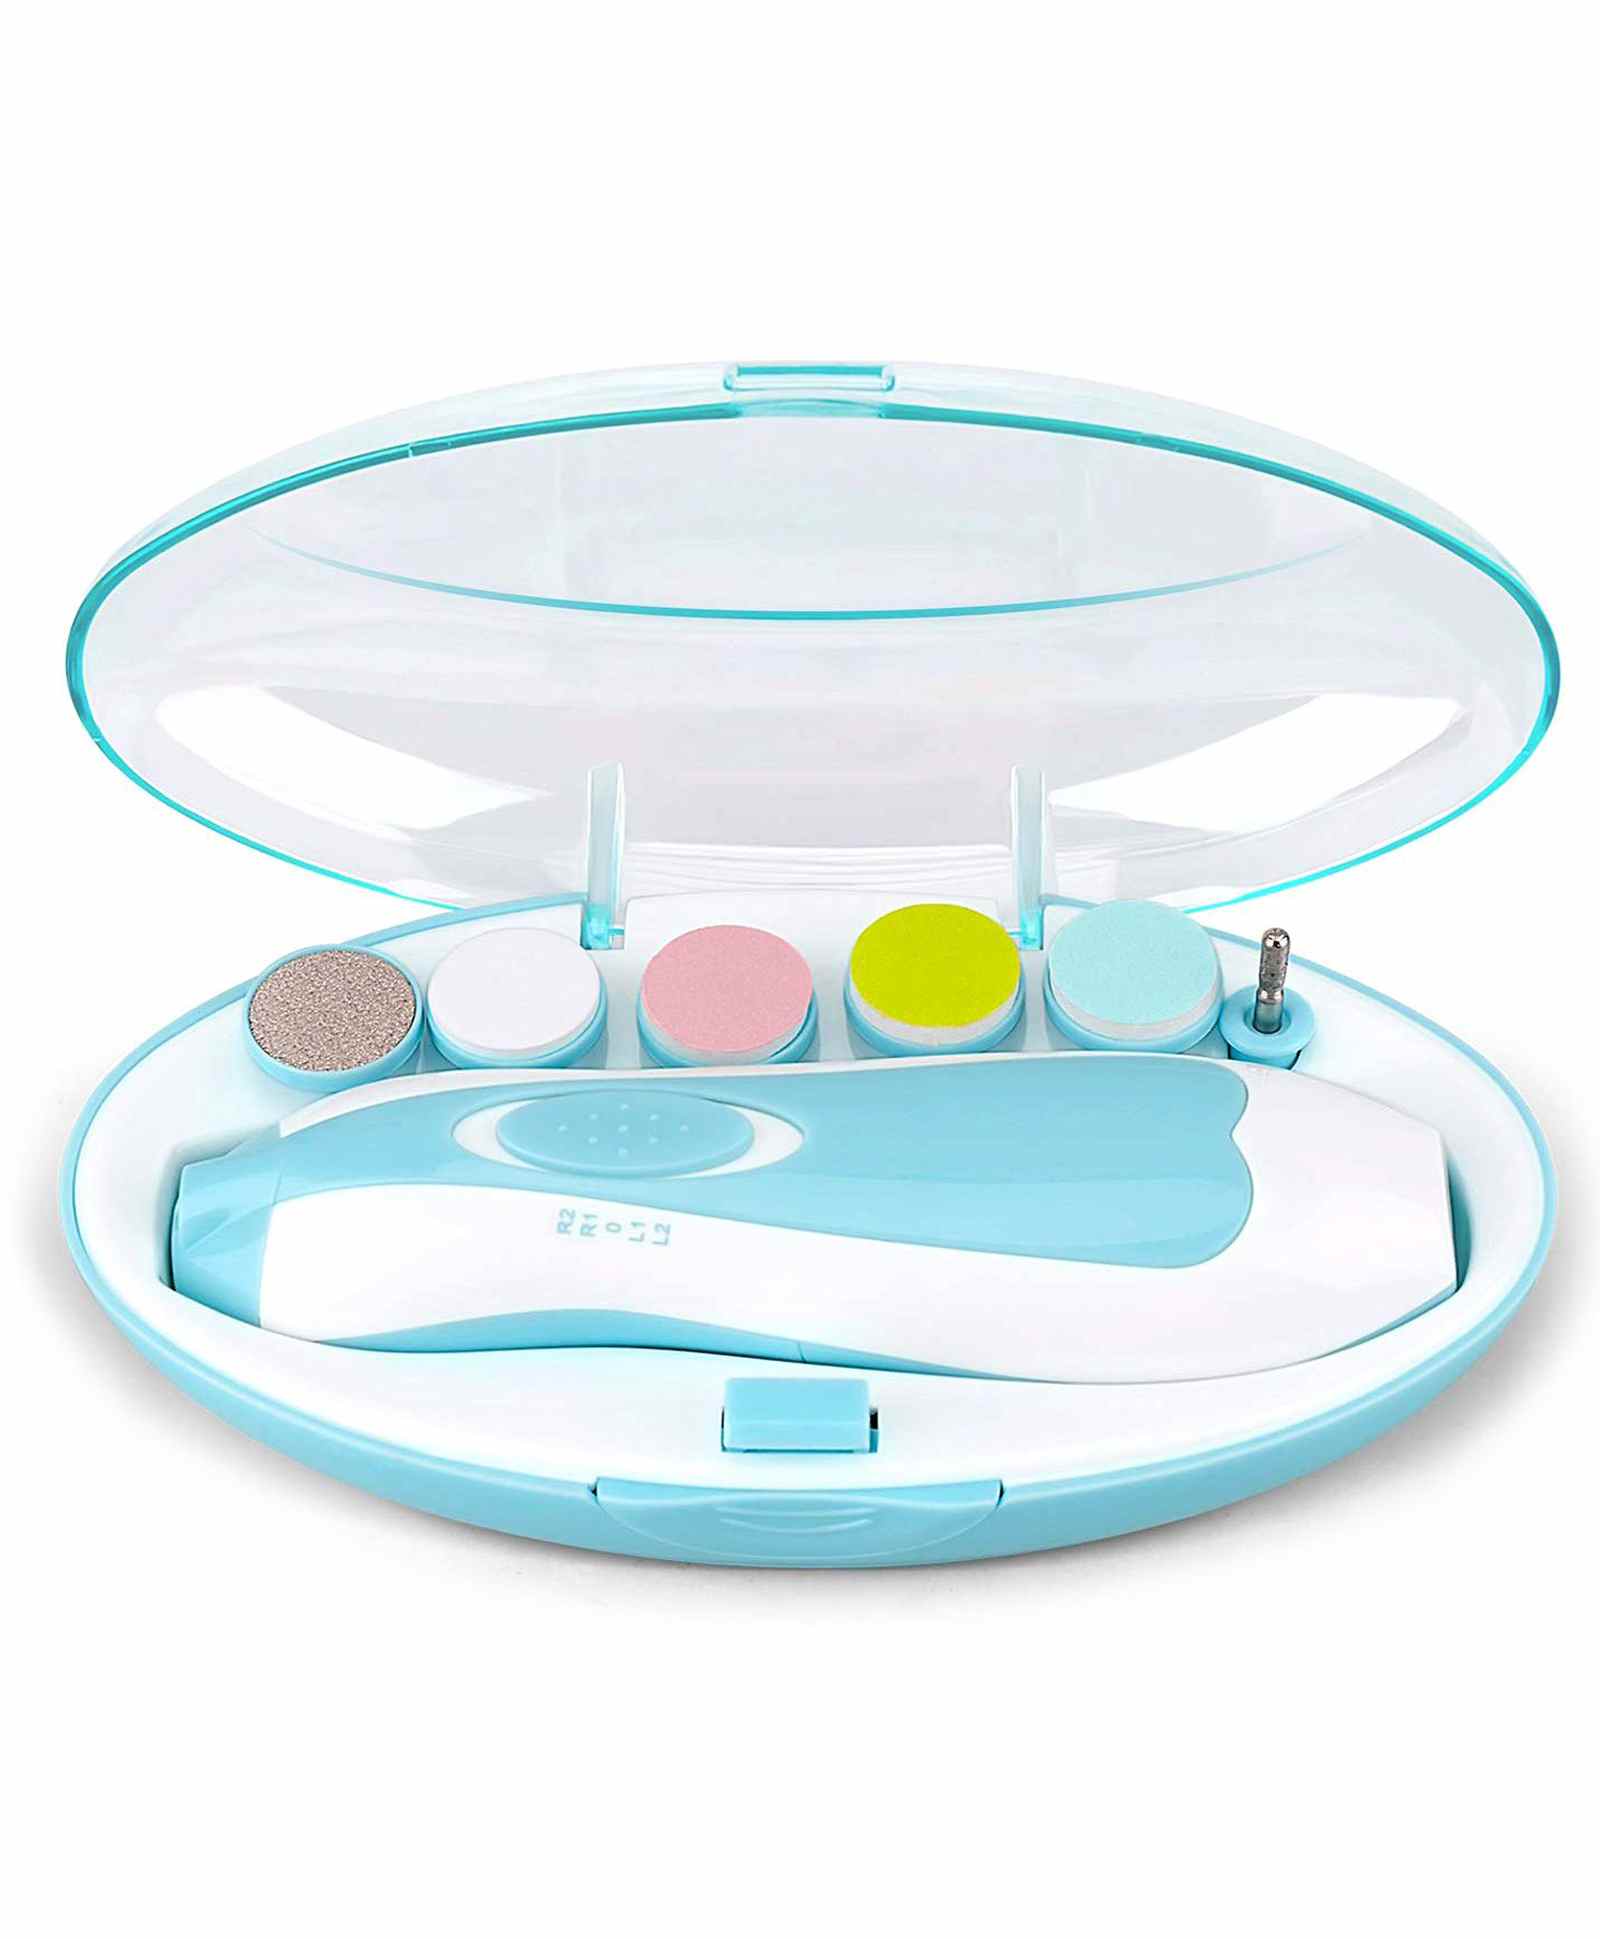 Lemetow Electric Baby Nail Trimmer Babies Safe Care Nail Clipper Cutter  Infant Newborn Nail Trimmer Manicure - Walmart.com